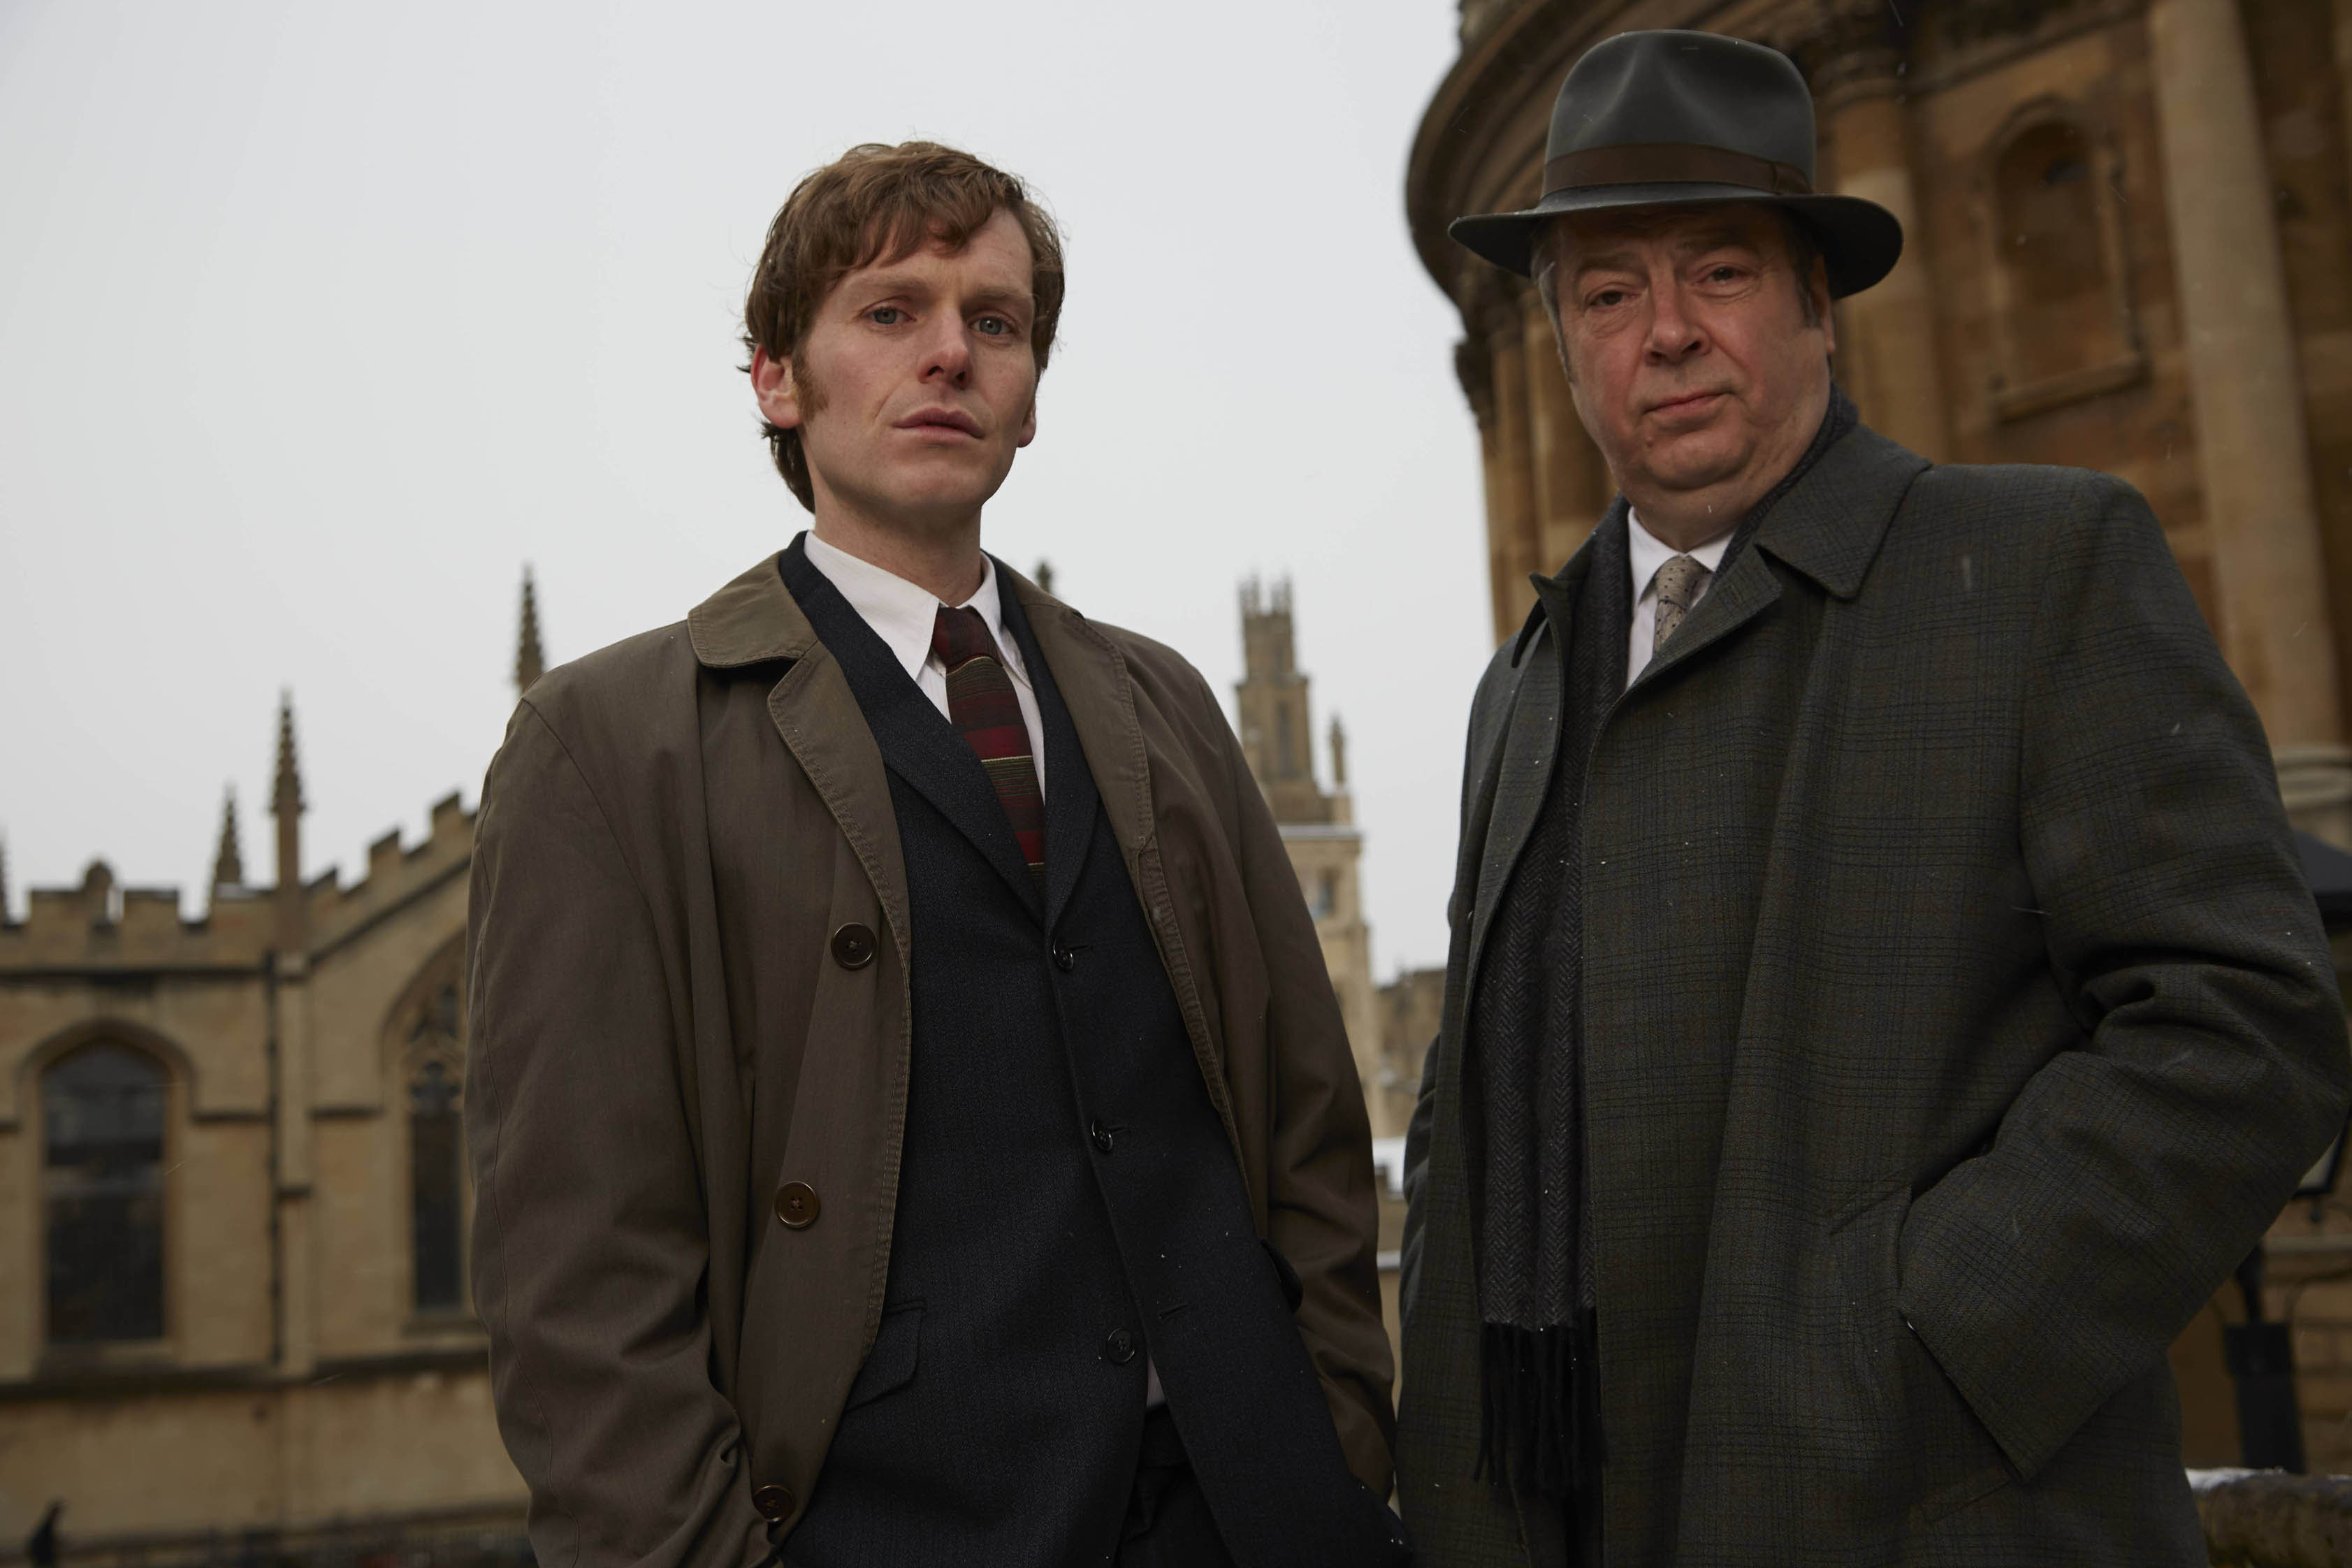 Shaun Evans and Roger Allam from "Endeavour" (Photo: Courtesy of (C) Patrick Redmond/ITV/Mammoth for MASTERPIECE)